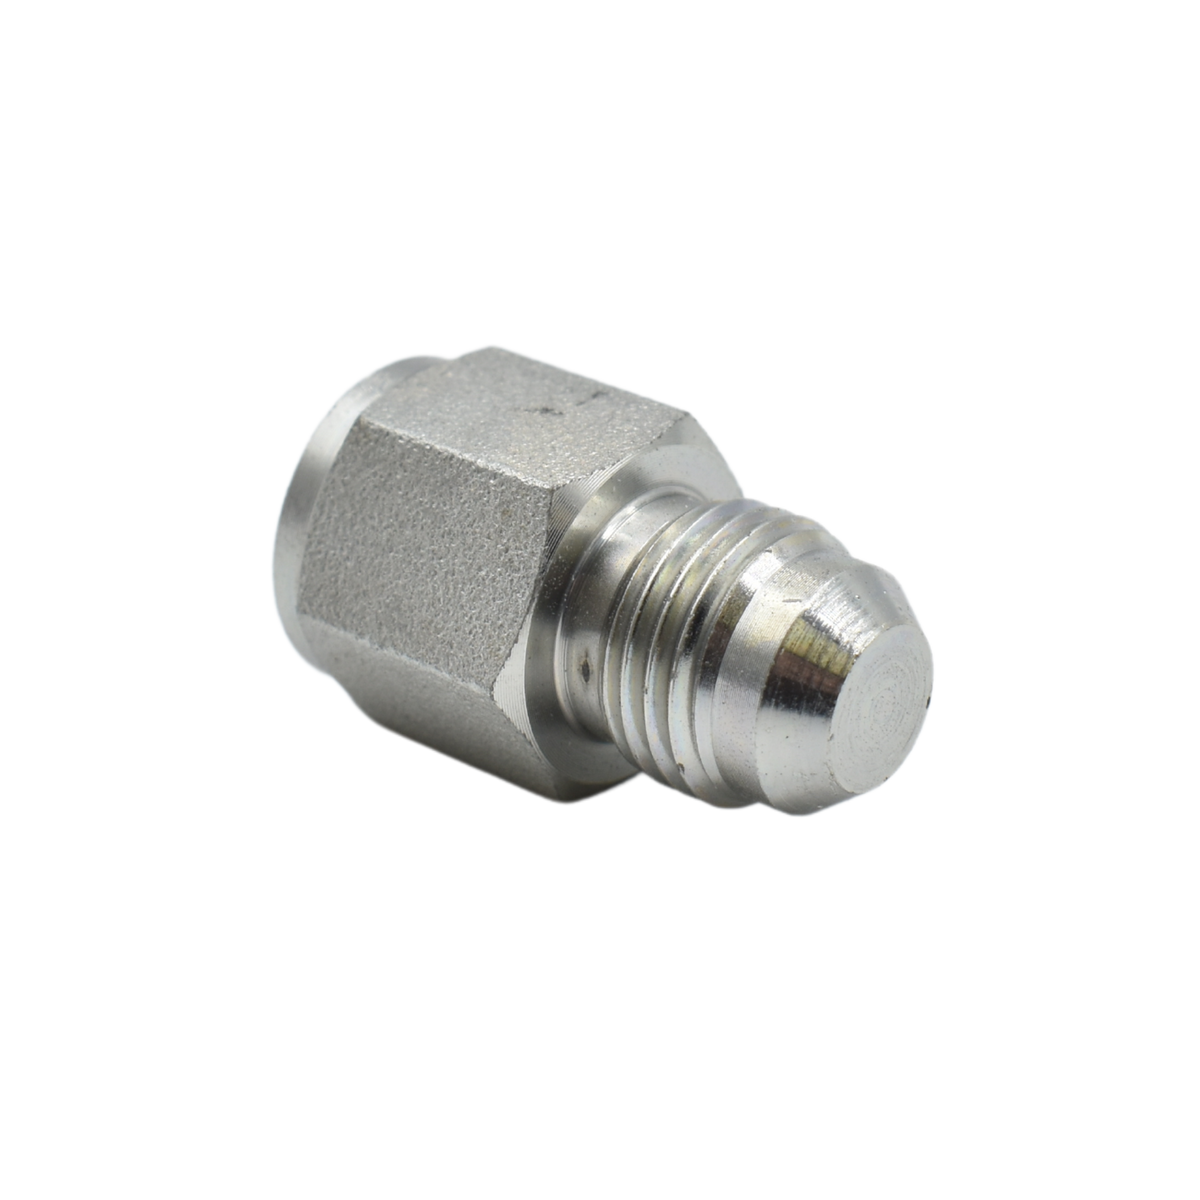  Reducer with Blank Orifice Adapter